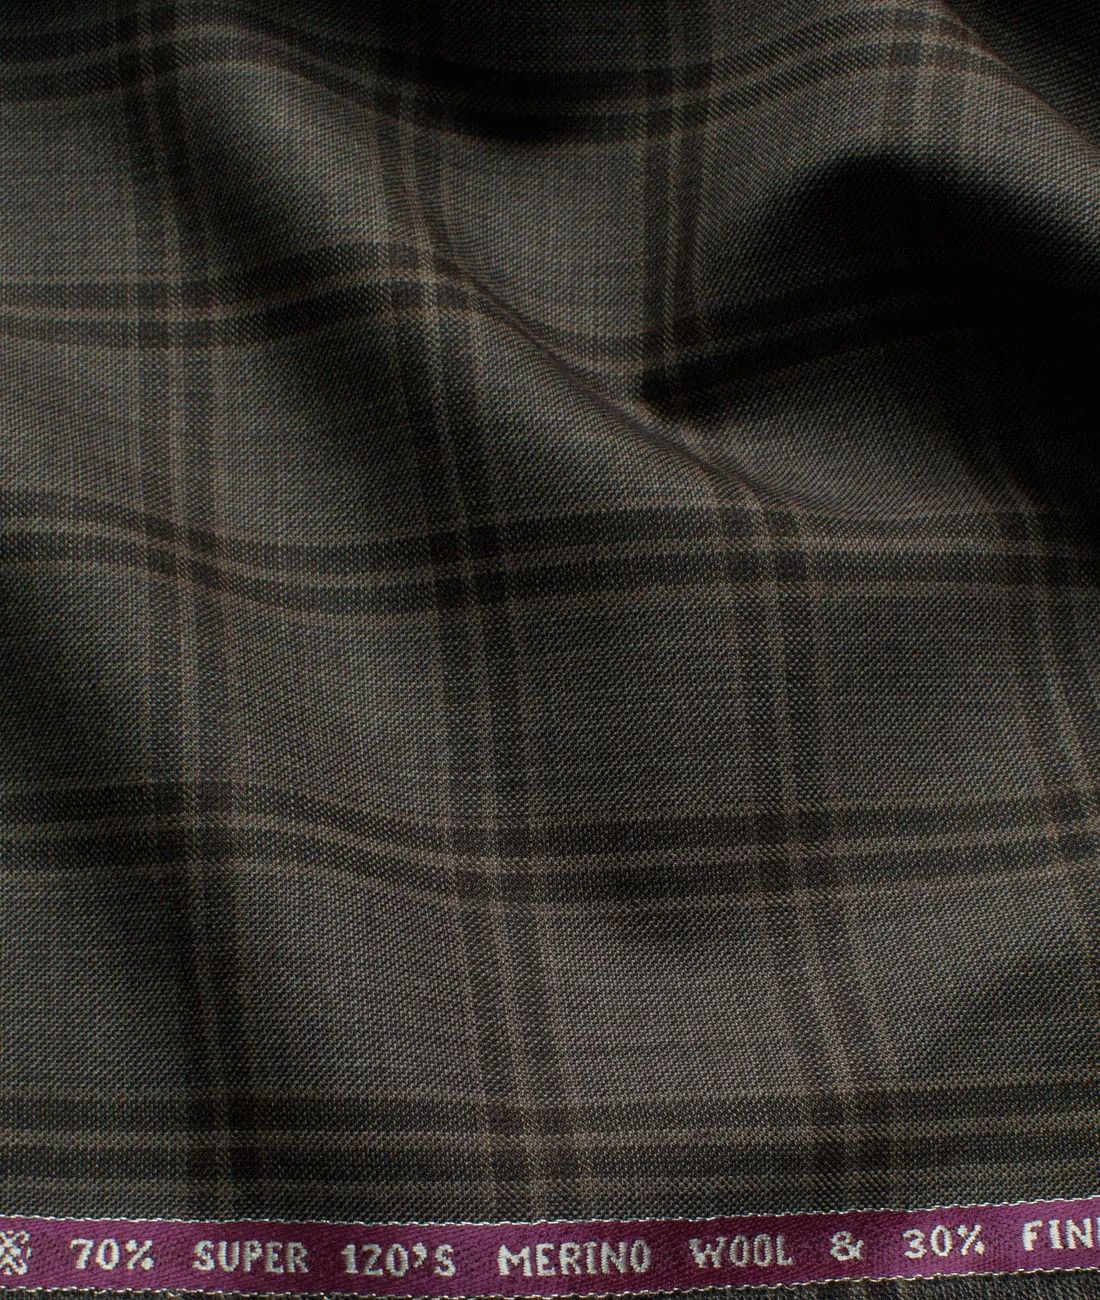 Wool Checks Super 120GÇÖs Unstitched Suiting Fabric Brown base with Black Broad Checks